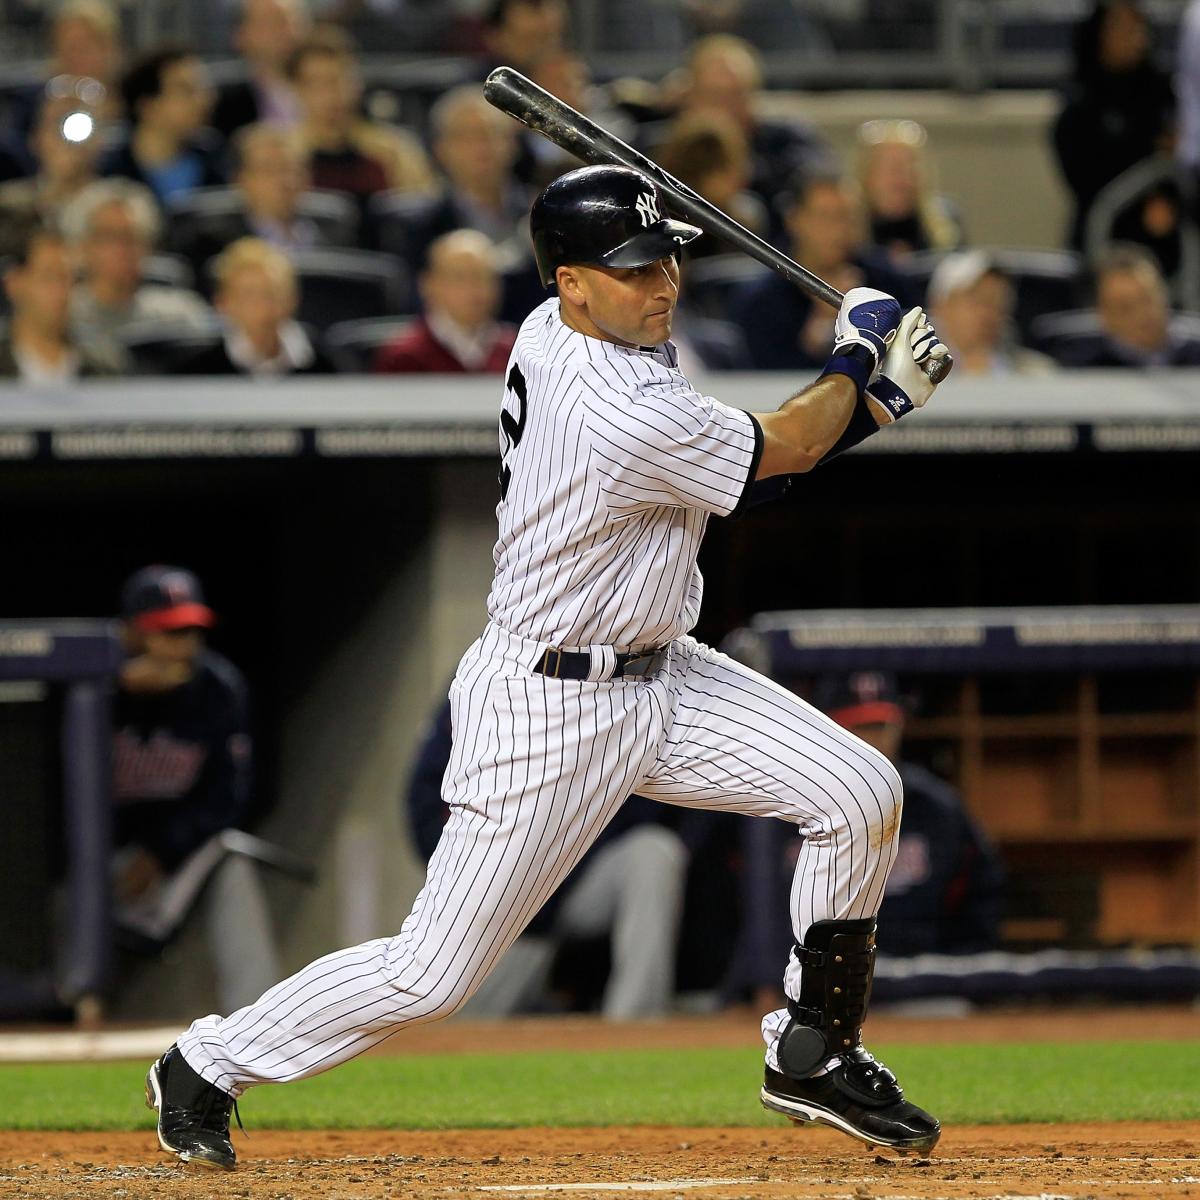 Derek Jeter Is Great by Both Old Standards and Modern Measurements | Bleacher Report ...1200 x 1200